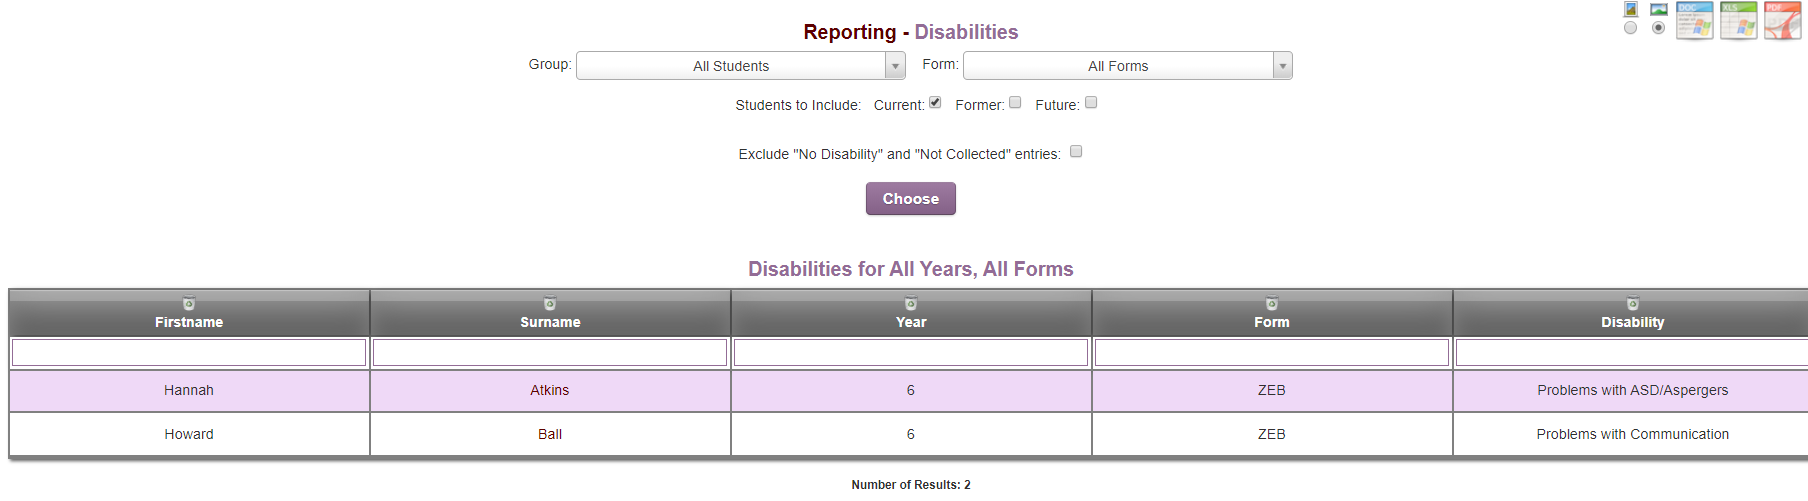 disability report.png